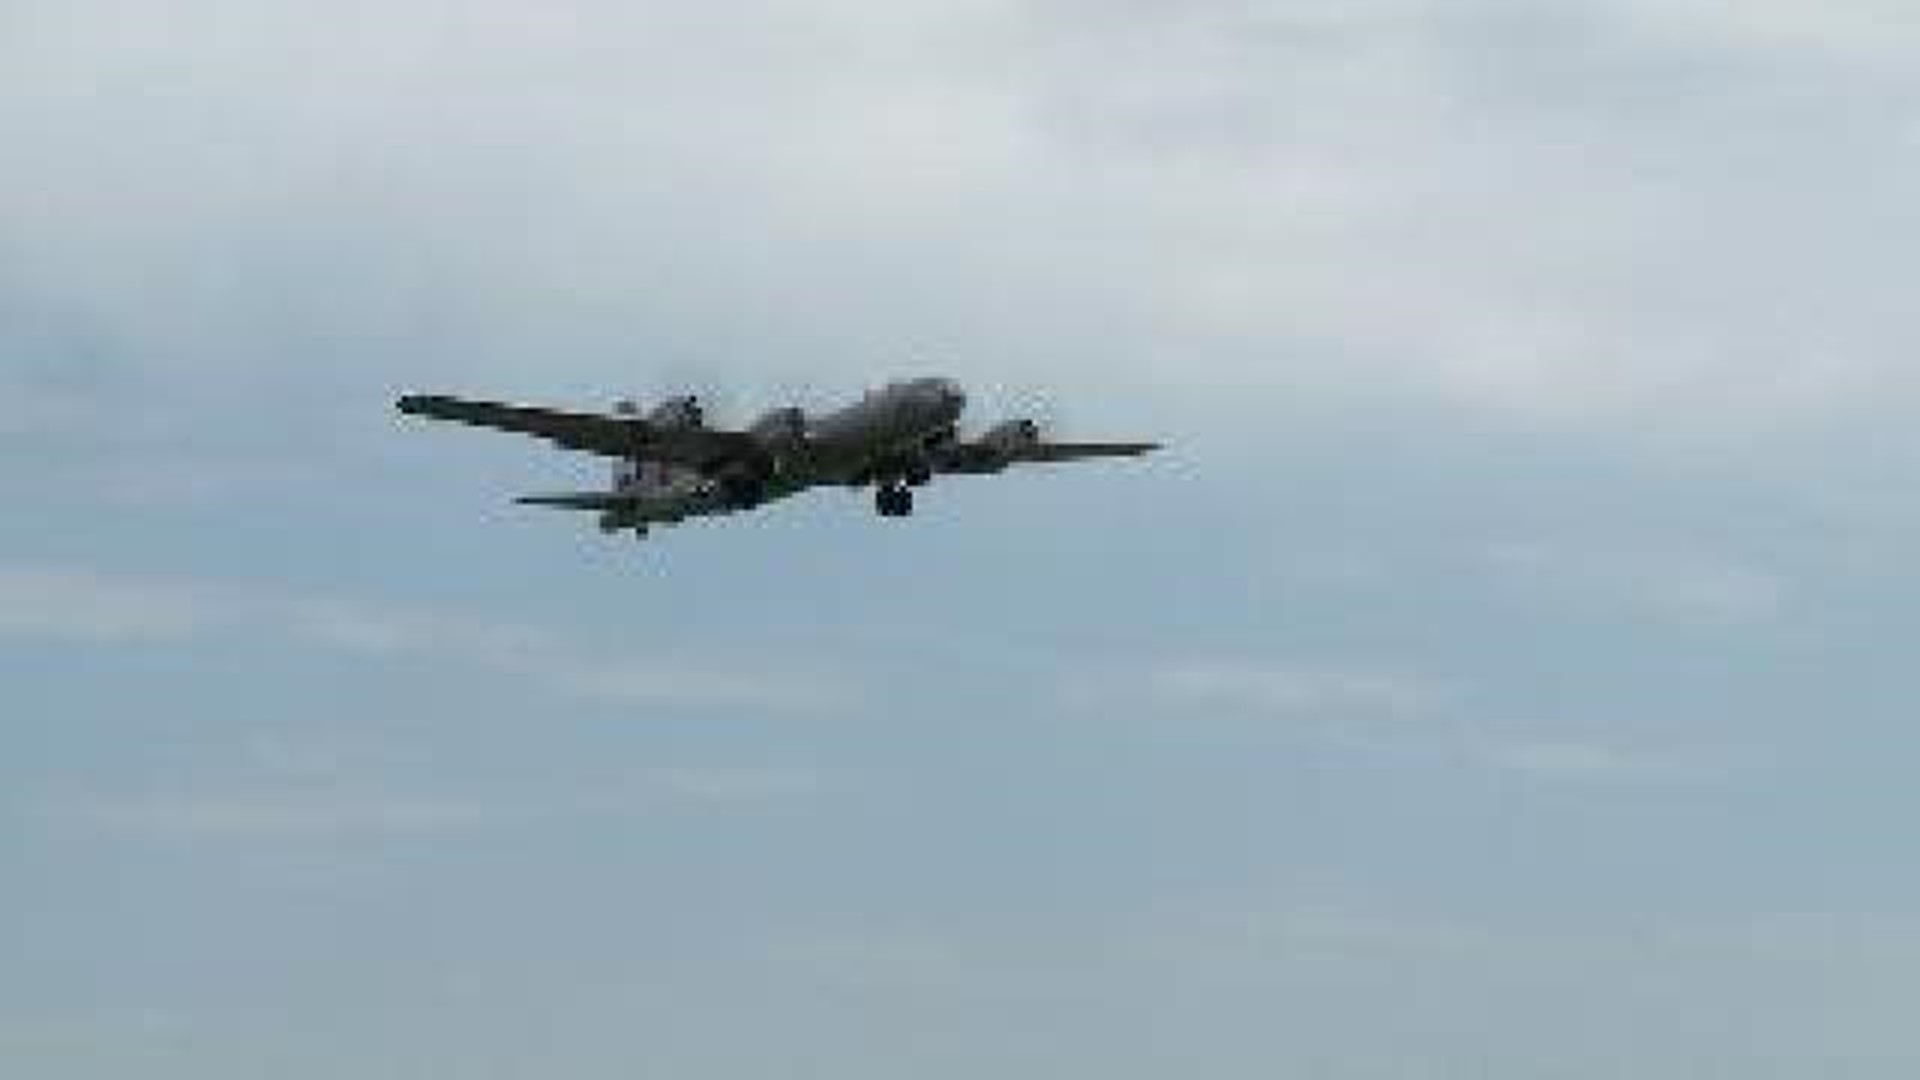 WWII Aircraft Lands in Fayetteville